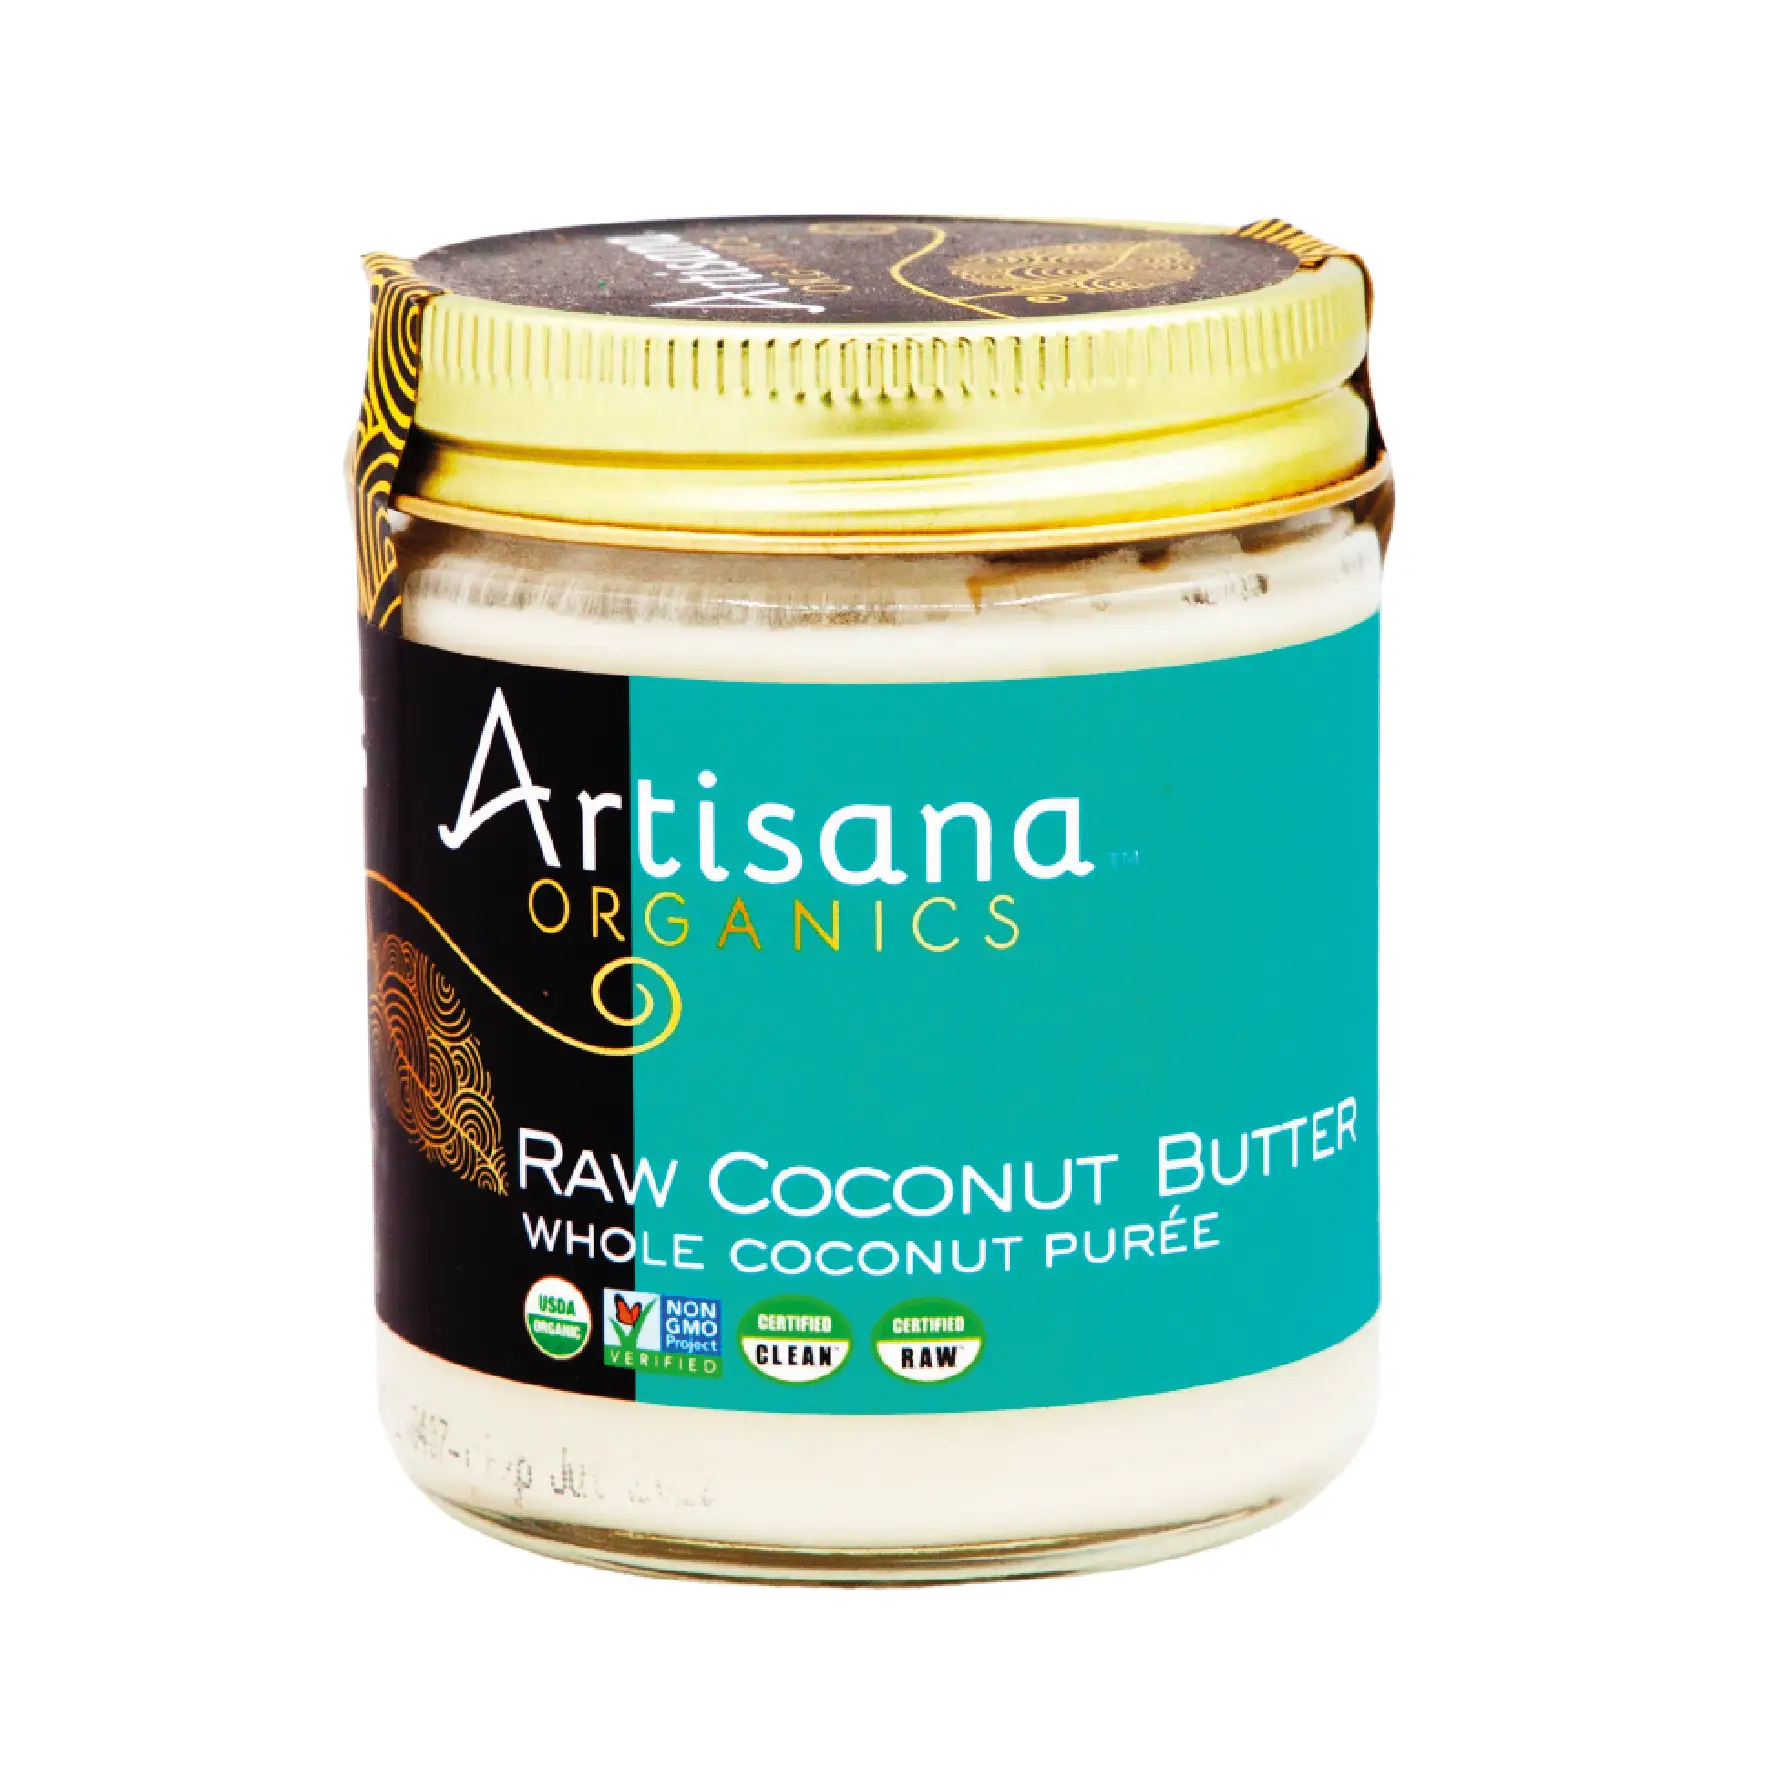 Raw Coconut Butter Delivery